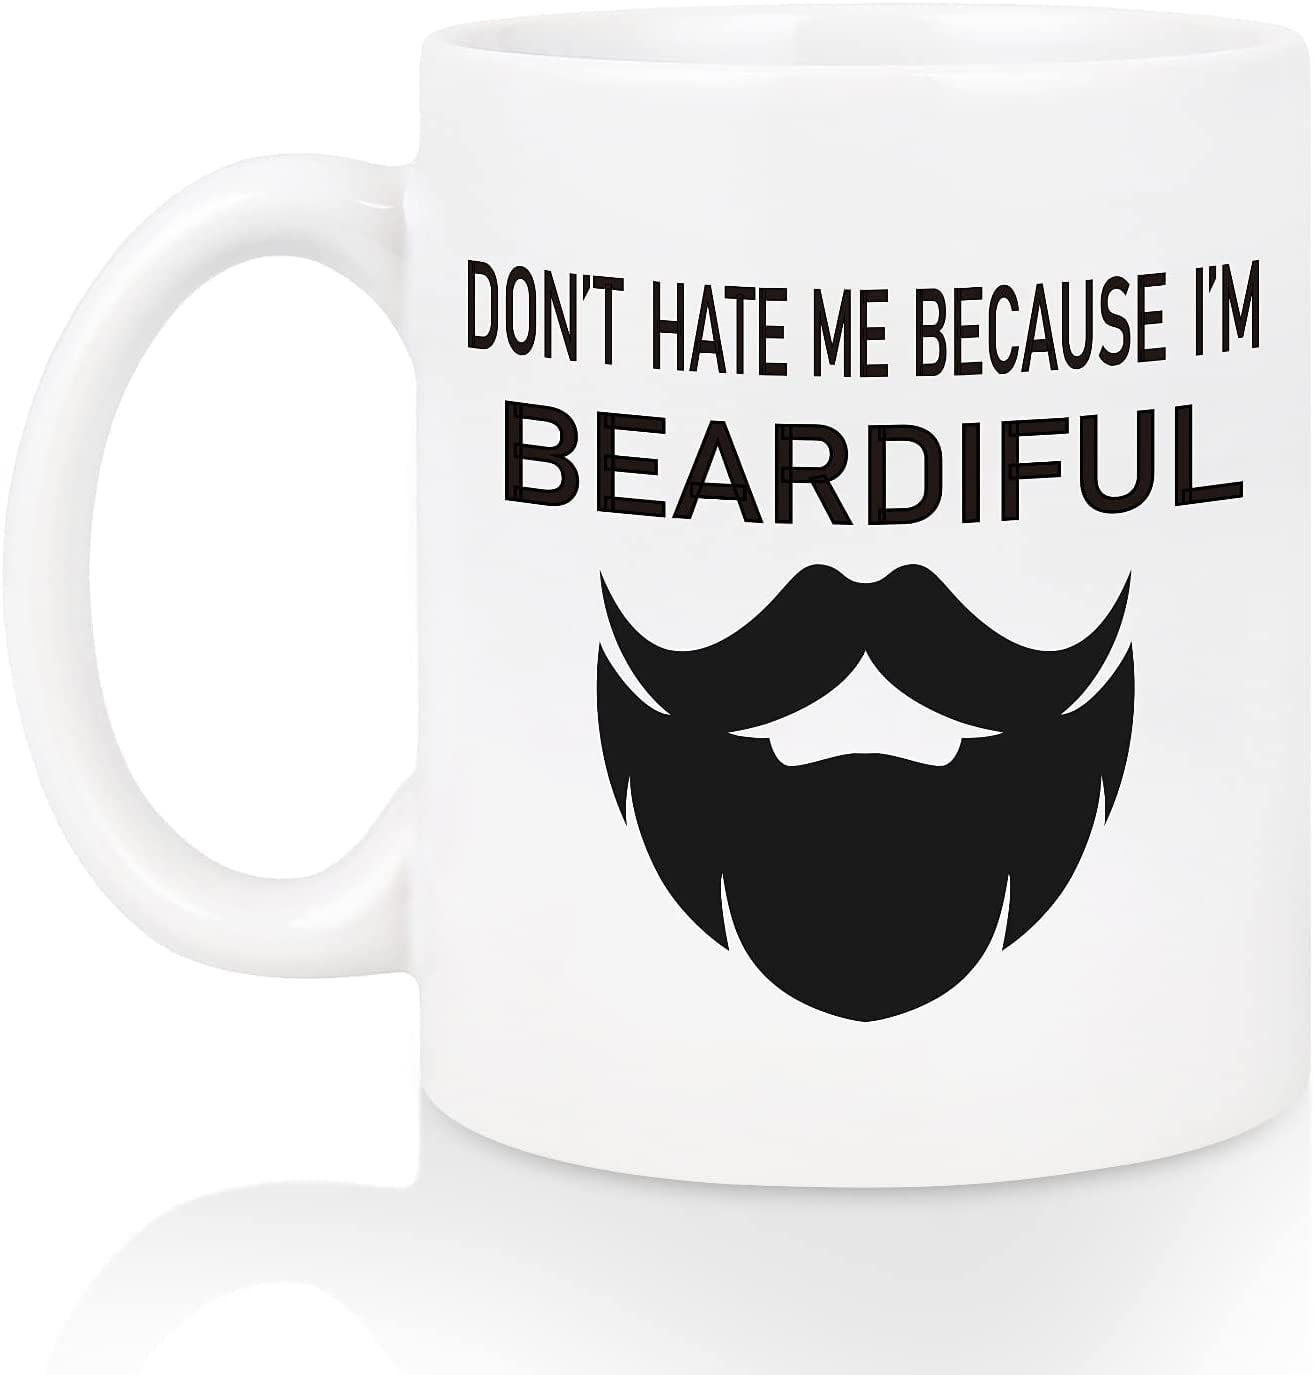 Funny Mugs for Men, Don't Hate Me Because I'm Beardiful Funny Coffee Mugs,  Coffee Cups for Men, Funny Beard Mugs, Manly Gifts for Men, Beard Gifts for  Him, Husband, Dad, Brother, Man,